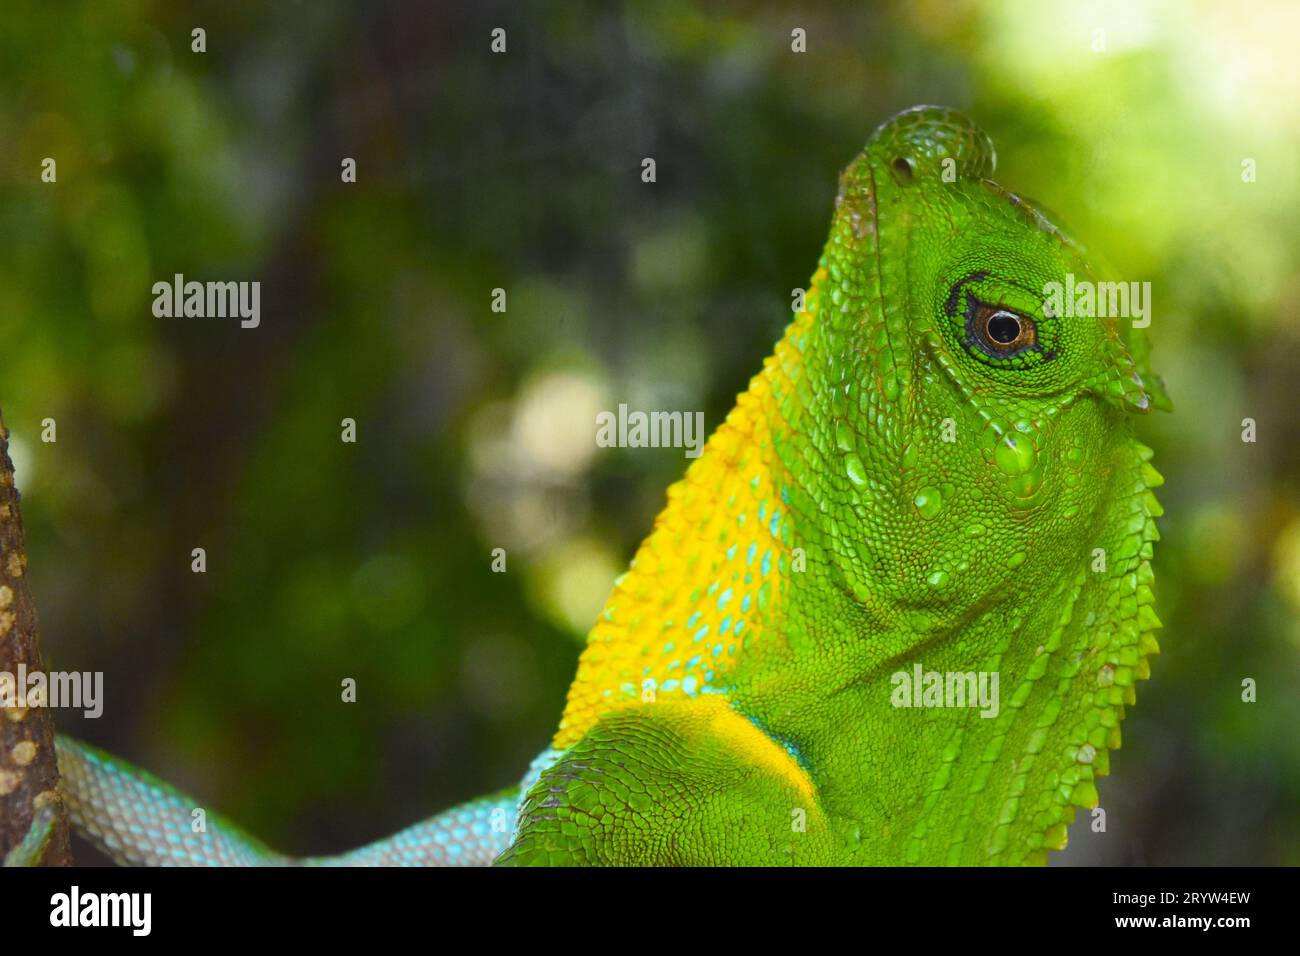 A close-up of a vibrant green and yellow Ceylon agama (Lyriocephalus scutatus) perched on a tree Stock Photo